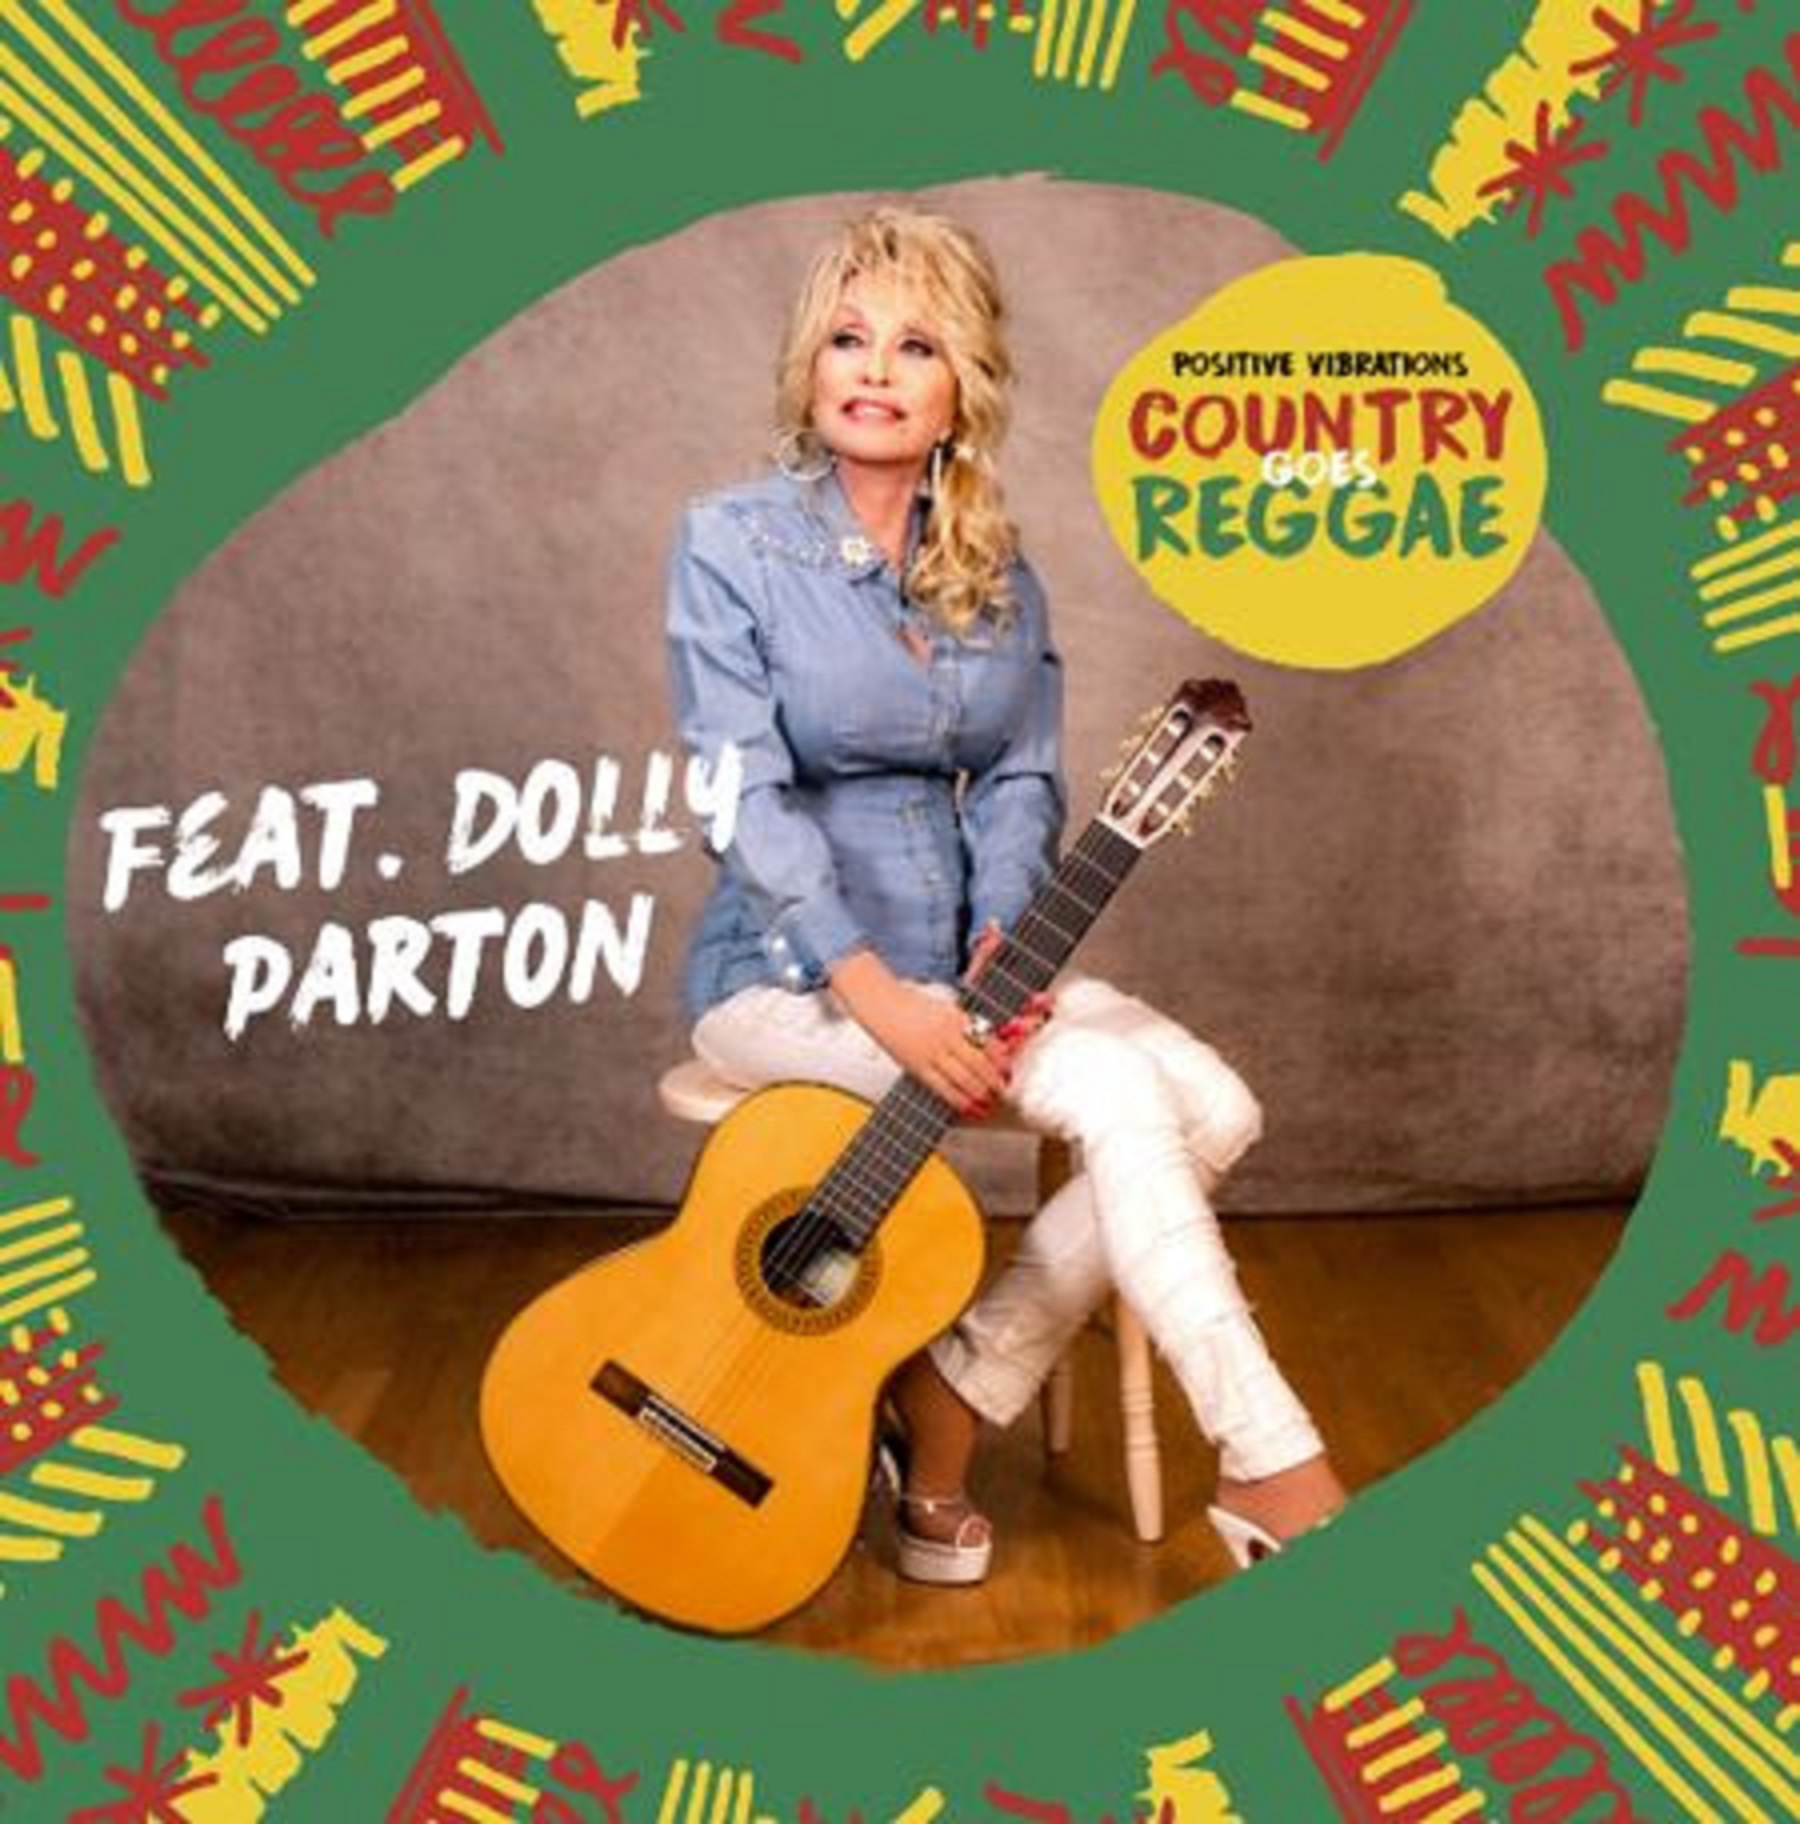 Dolly Parton, Alabama, Jimmie Allen and More Join Positive Vibrations on 'Country Goes Reggae' Album - Out Now